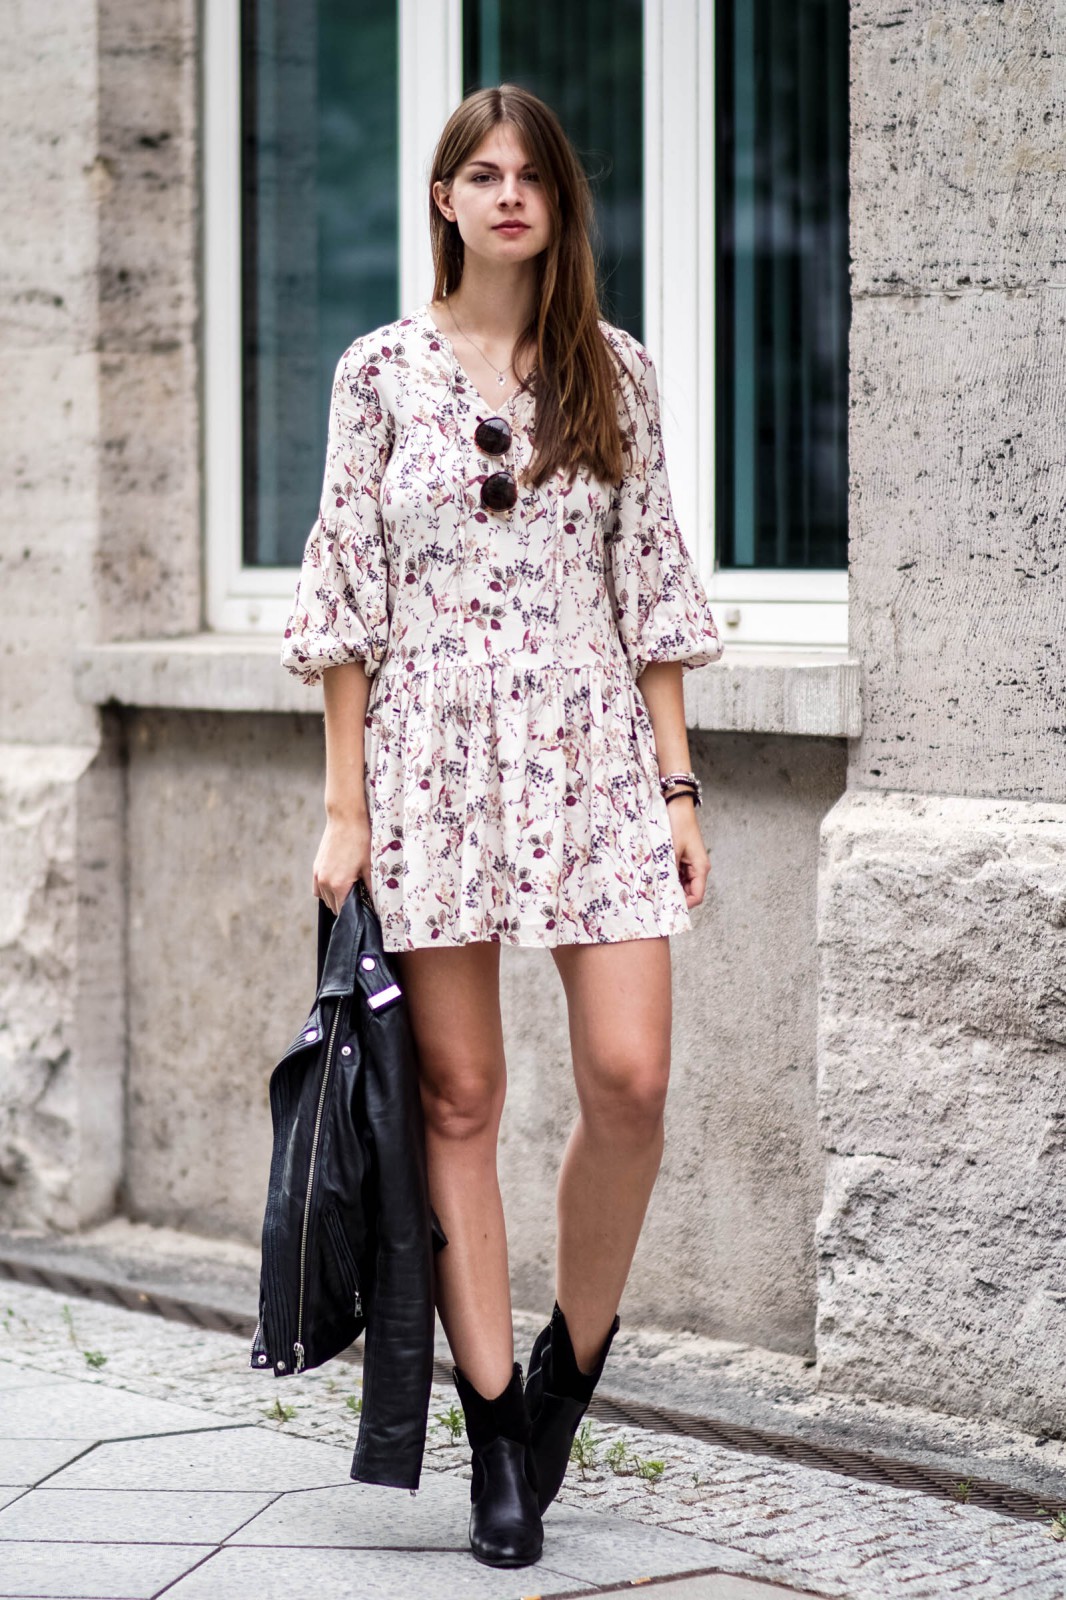 Flower Dress and Boots